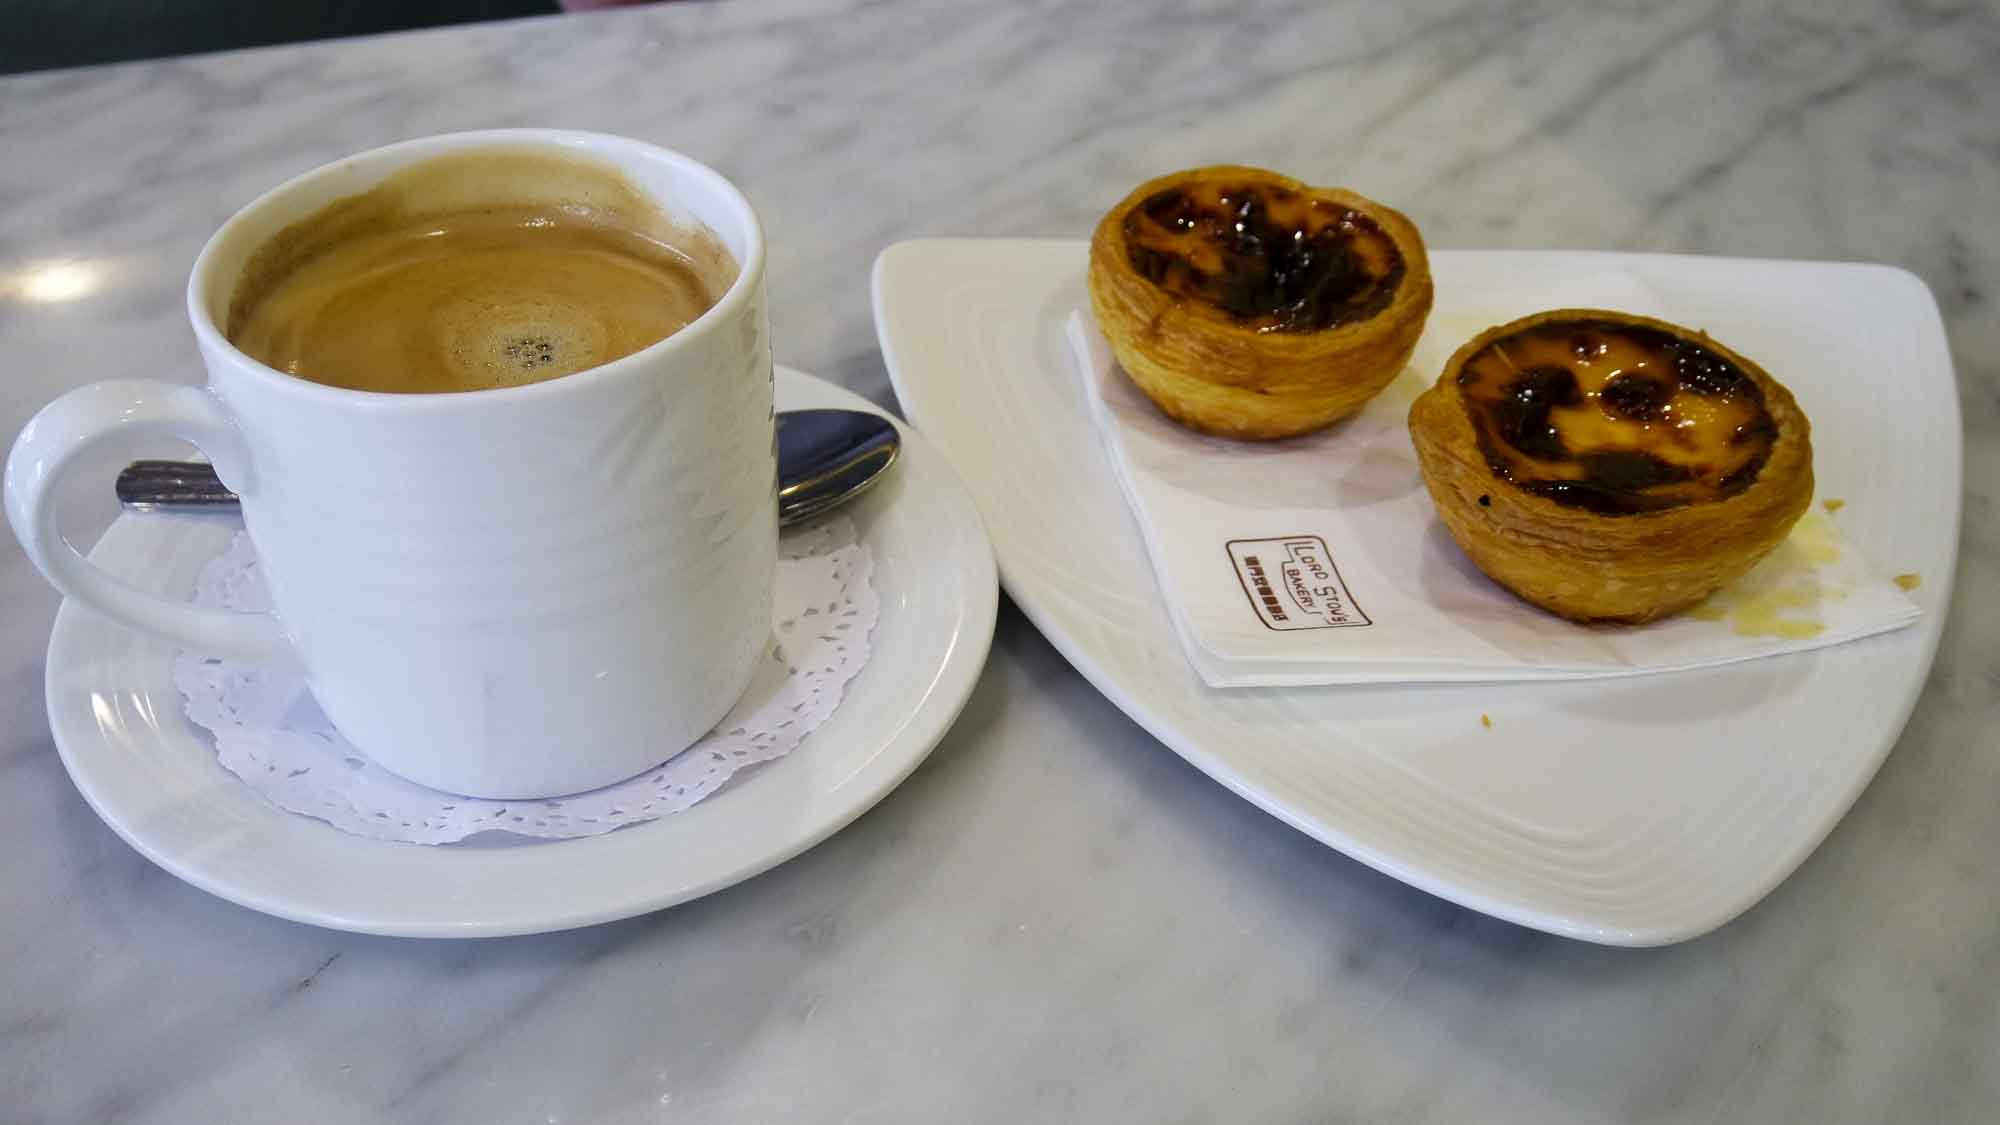 Egg tart tasting at Lord Stow's bakery